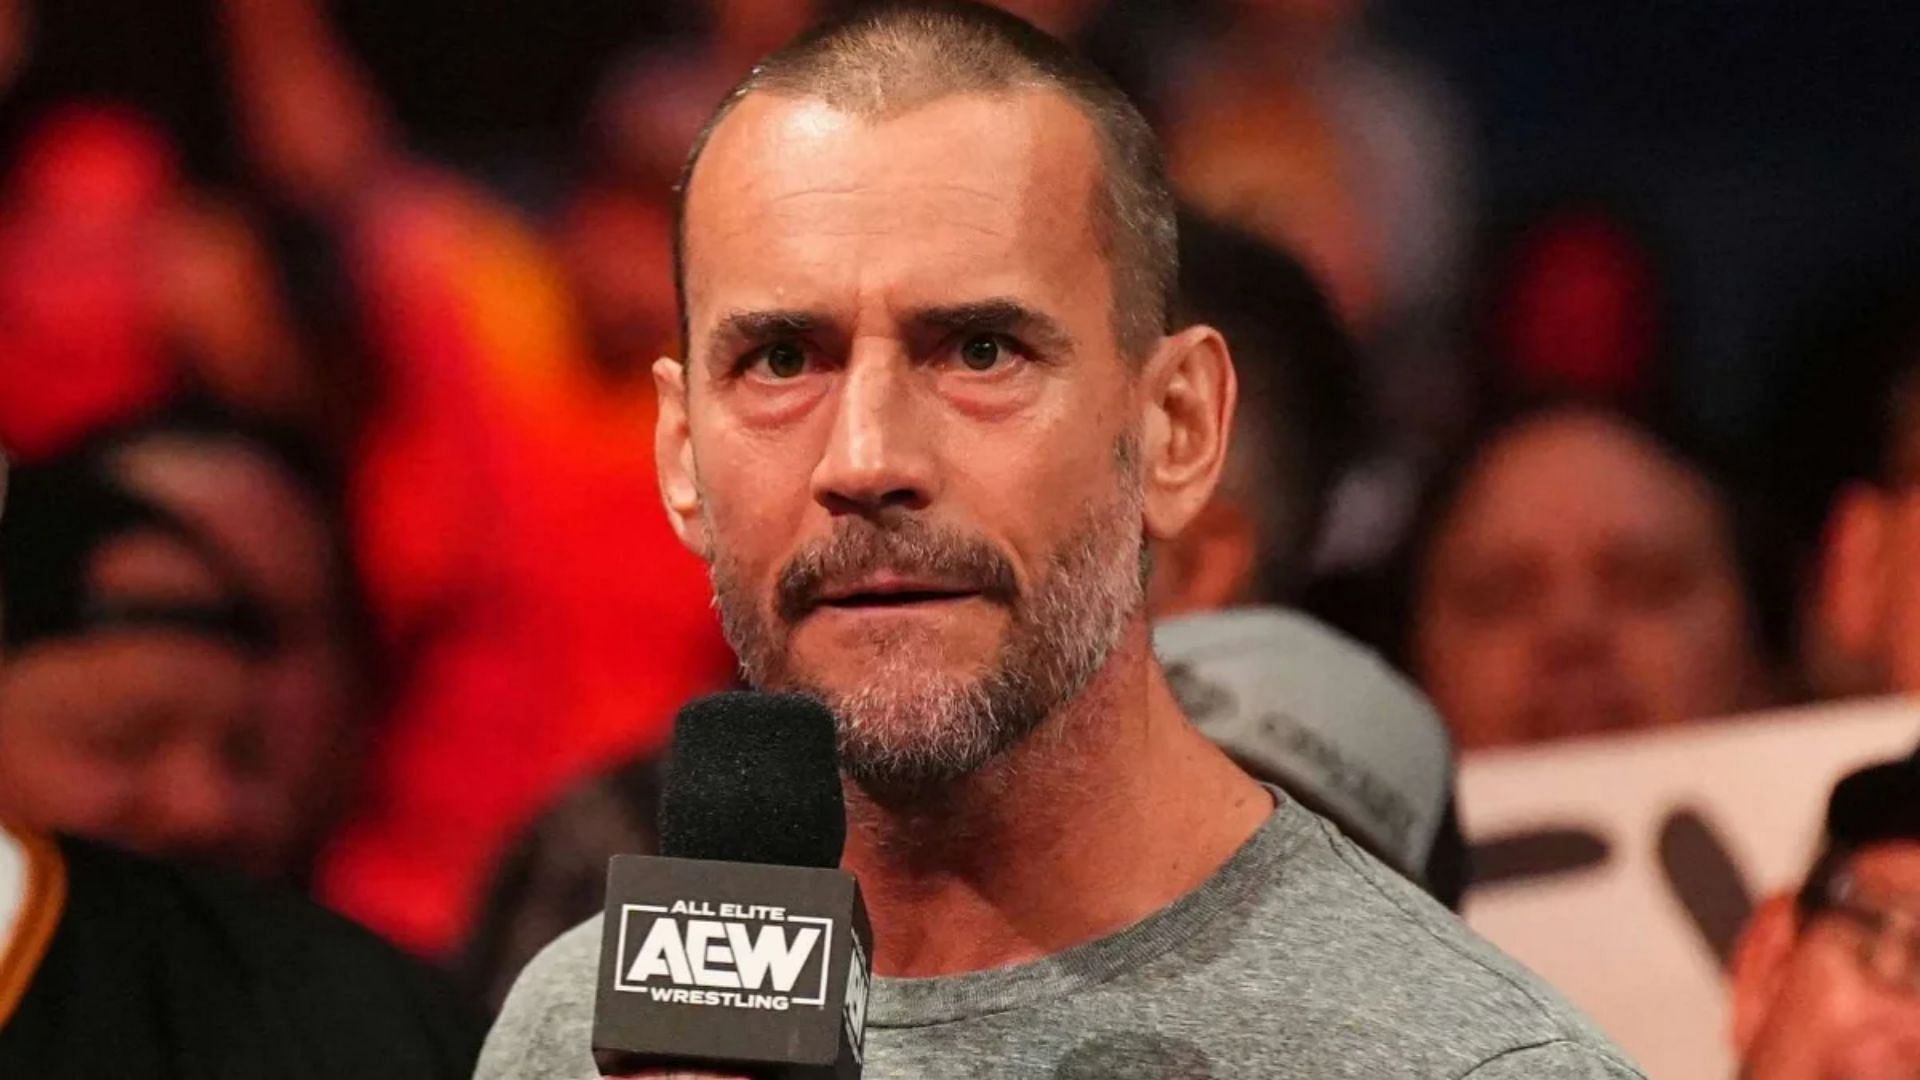 Just how heated did this altercation with CM Punk become?